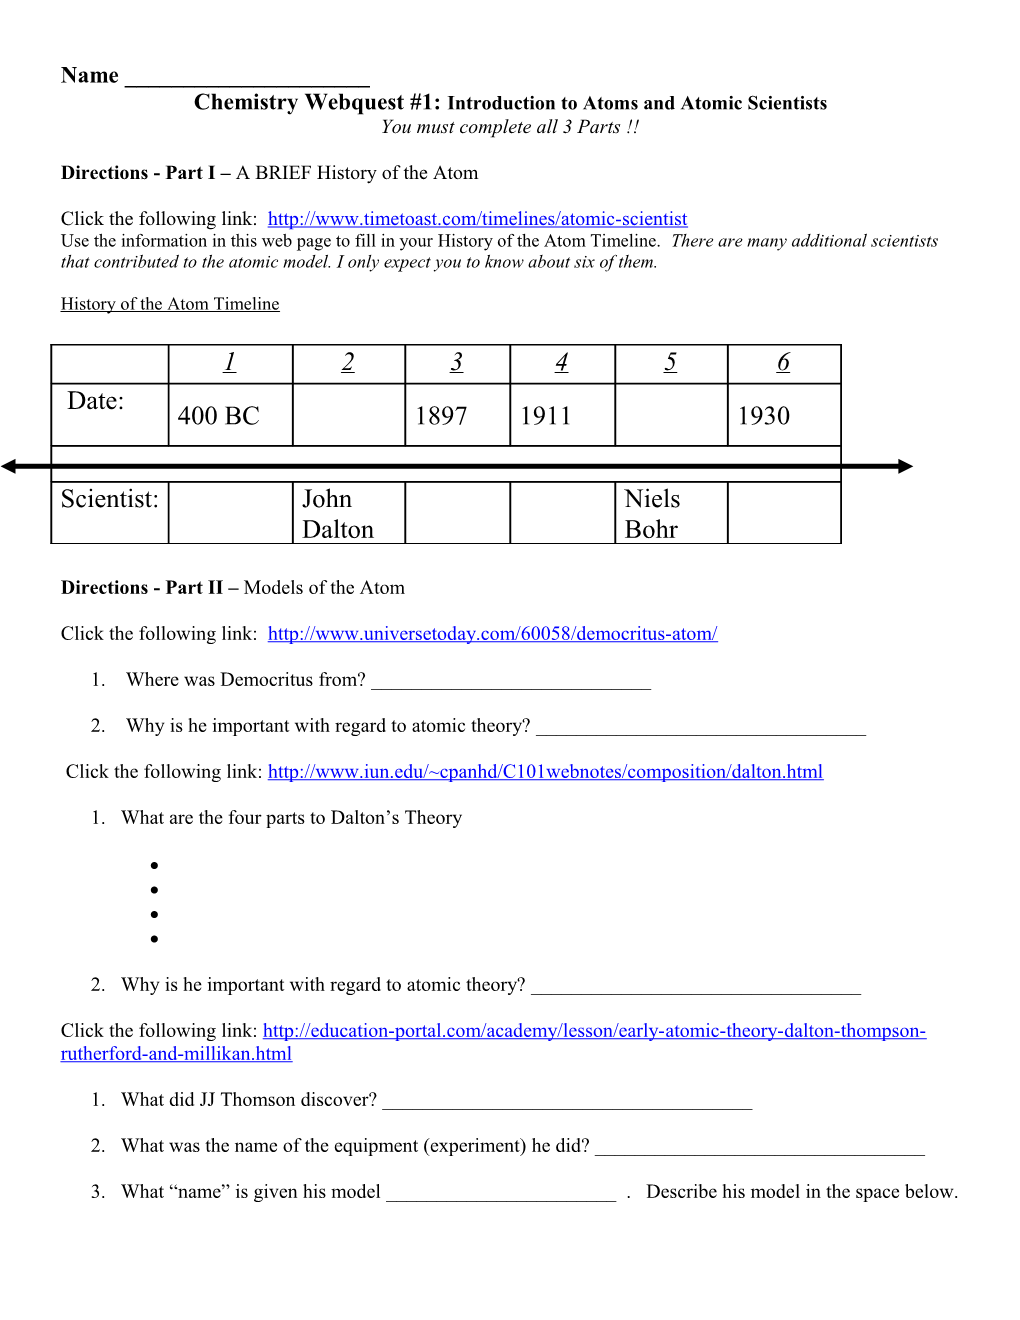 Chemistry Webquest #1: Introduction to Atoms Worksheet s1